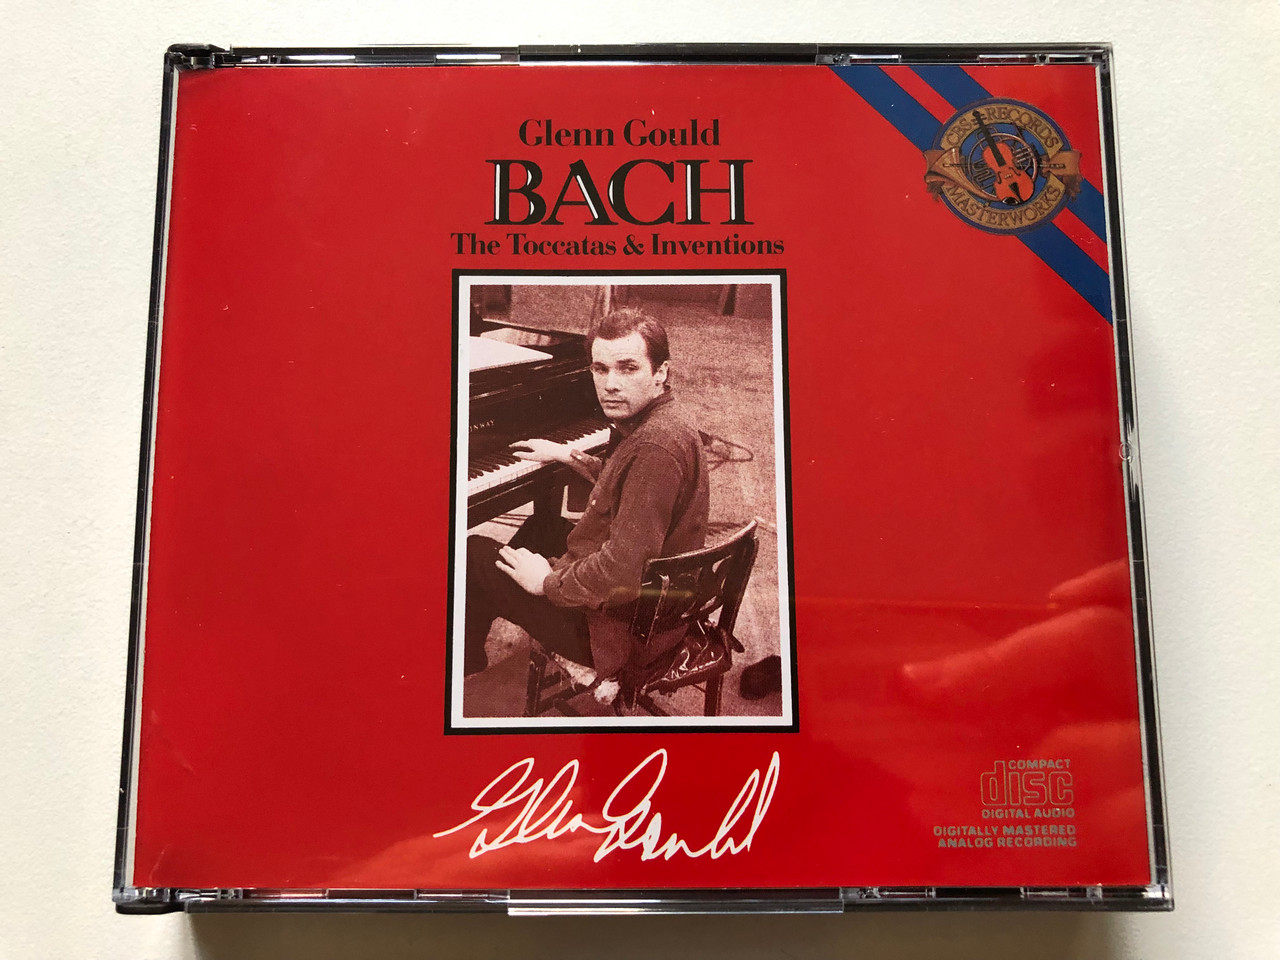 https://cdn10.bigcommerce.com/s-62bdpkt7pb/products/0/images/312466/Glenn_Gould_-_Bach_The_Toccatas_Inventions_CBS_Masterworks_2x_Audio_CD_1987_M2K_42269_1__20153.1700039282.1280.1280.JPG?c=2